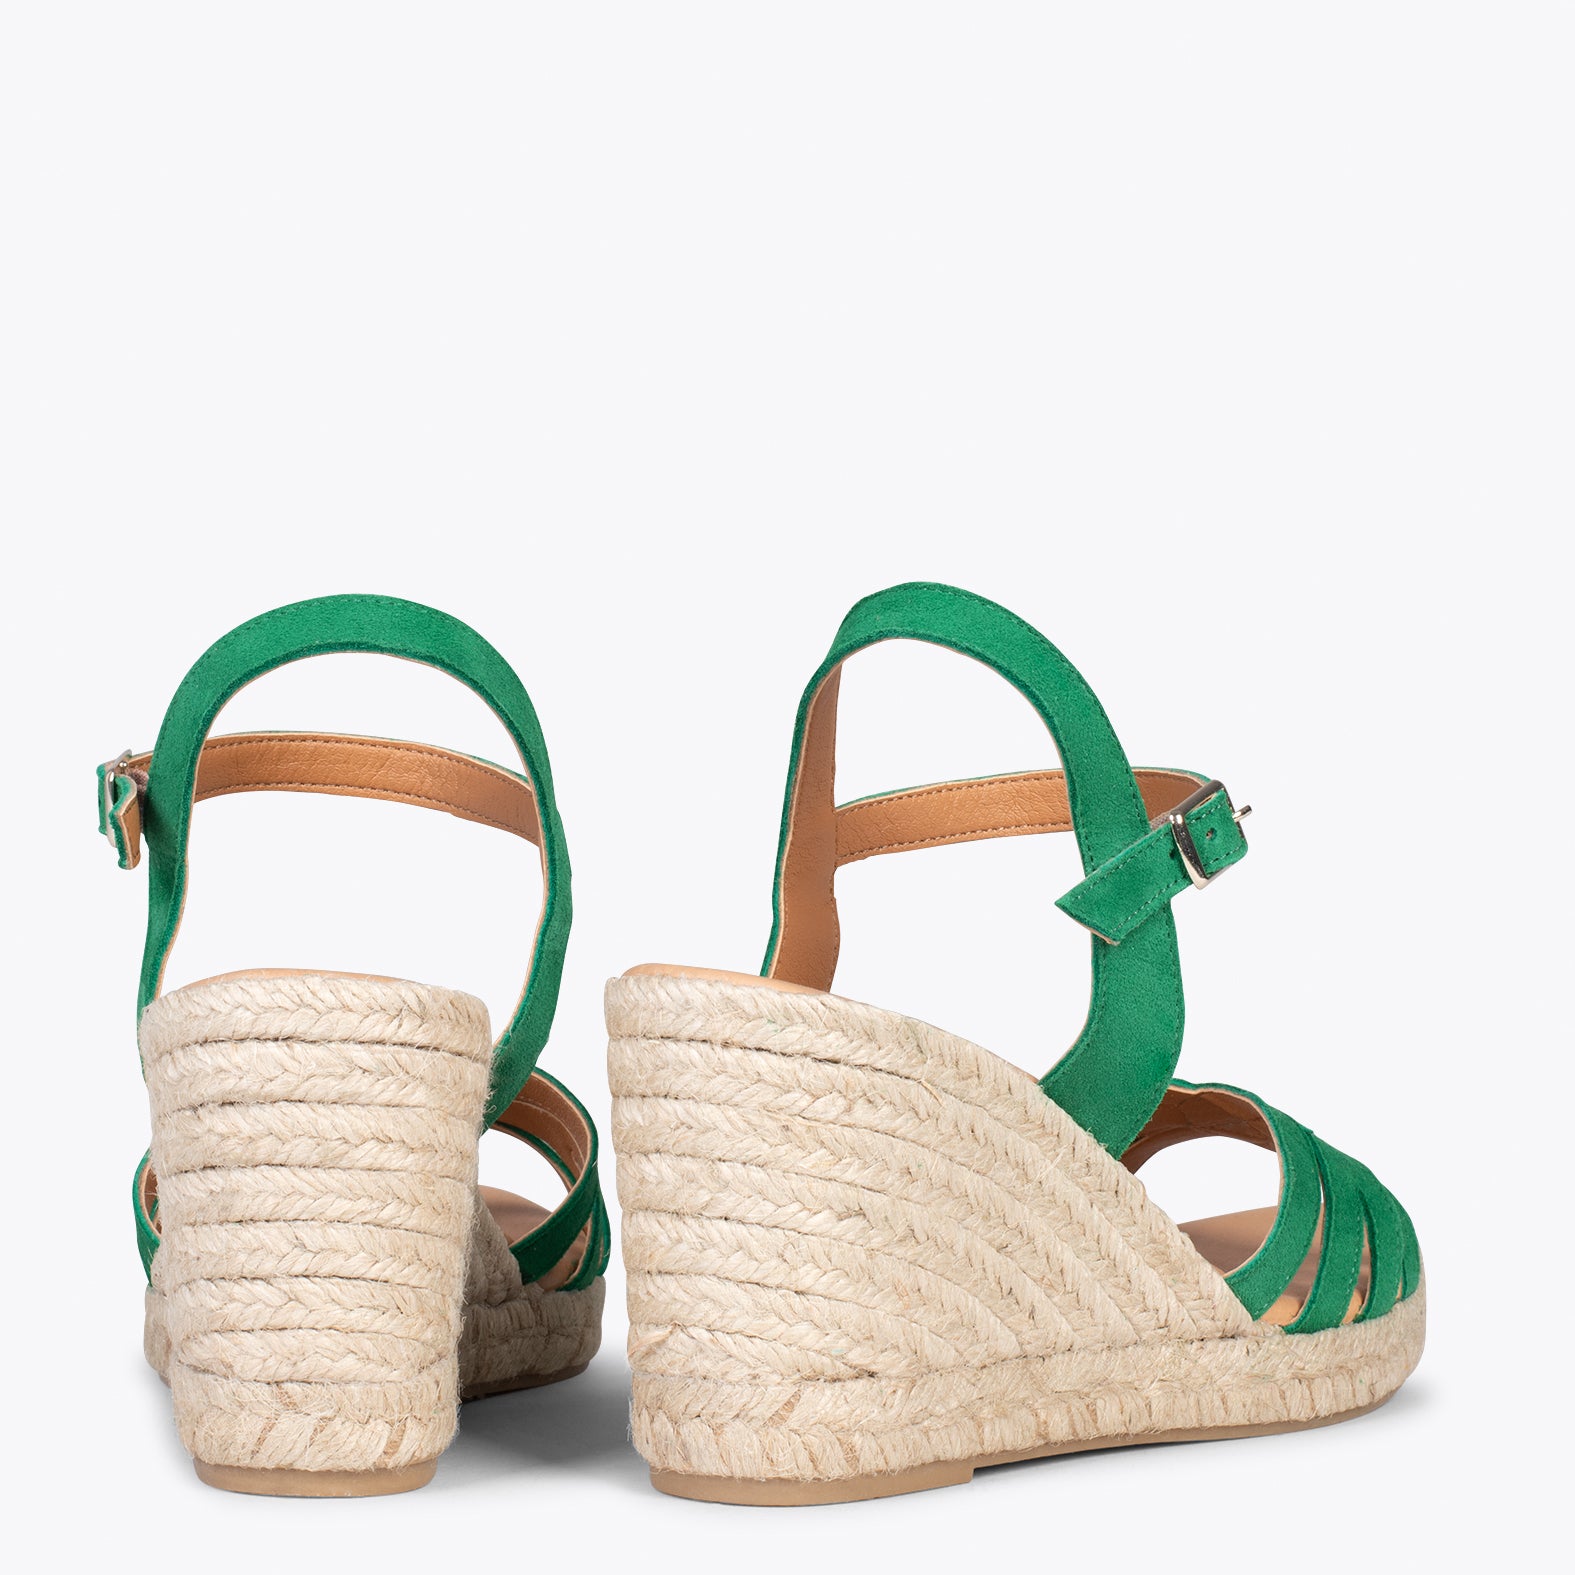 HOYAMBRE – GREEN espadrilles with braided front